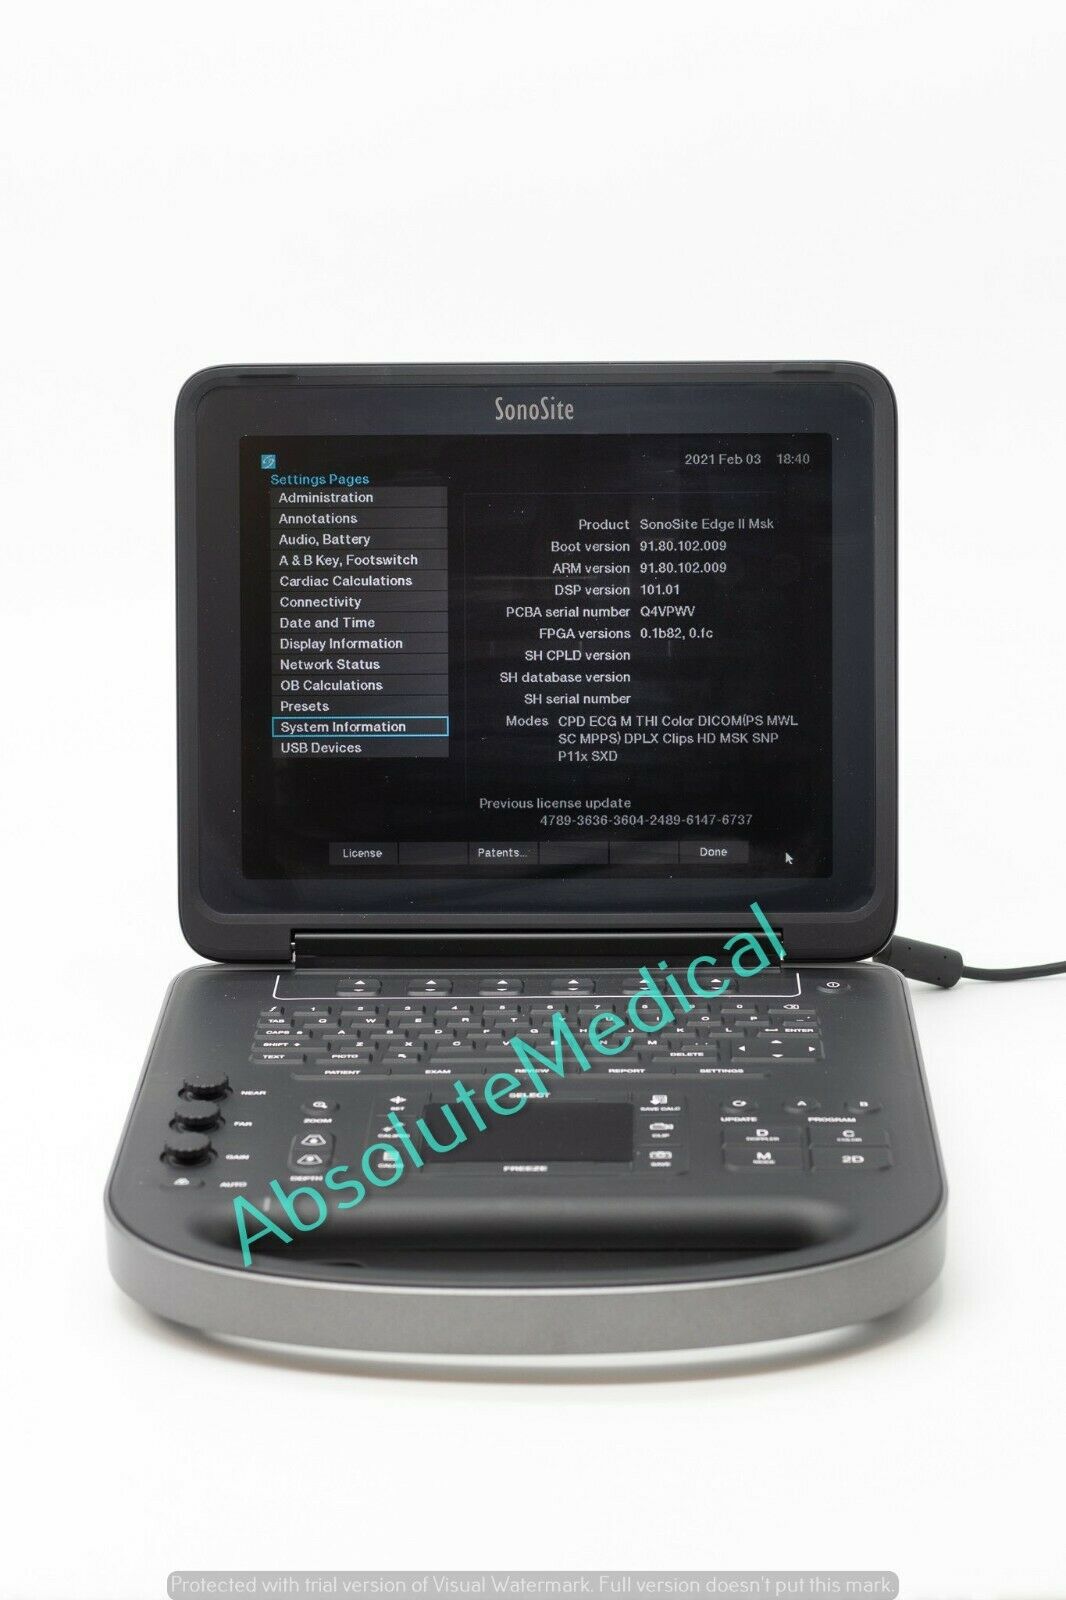 Sonosite Edge 2 FujiFilm Ultrasound Portable -Biomed Certified, Probes available DIAGNOSTIC ULTRASOUND MACHINES FOR SALE